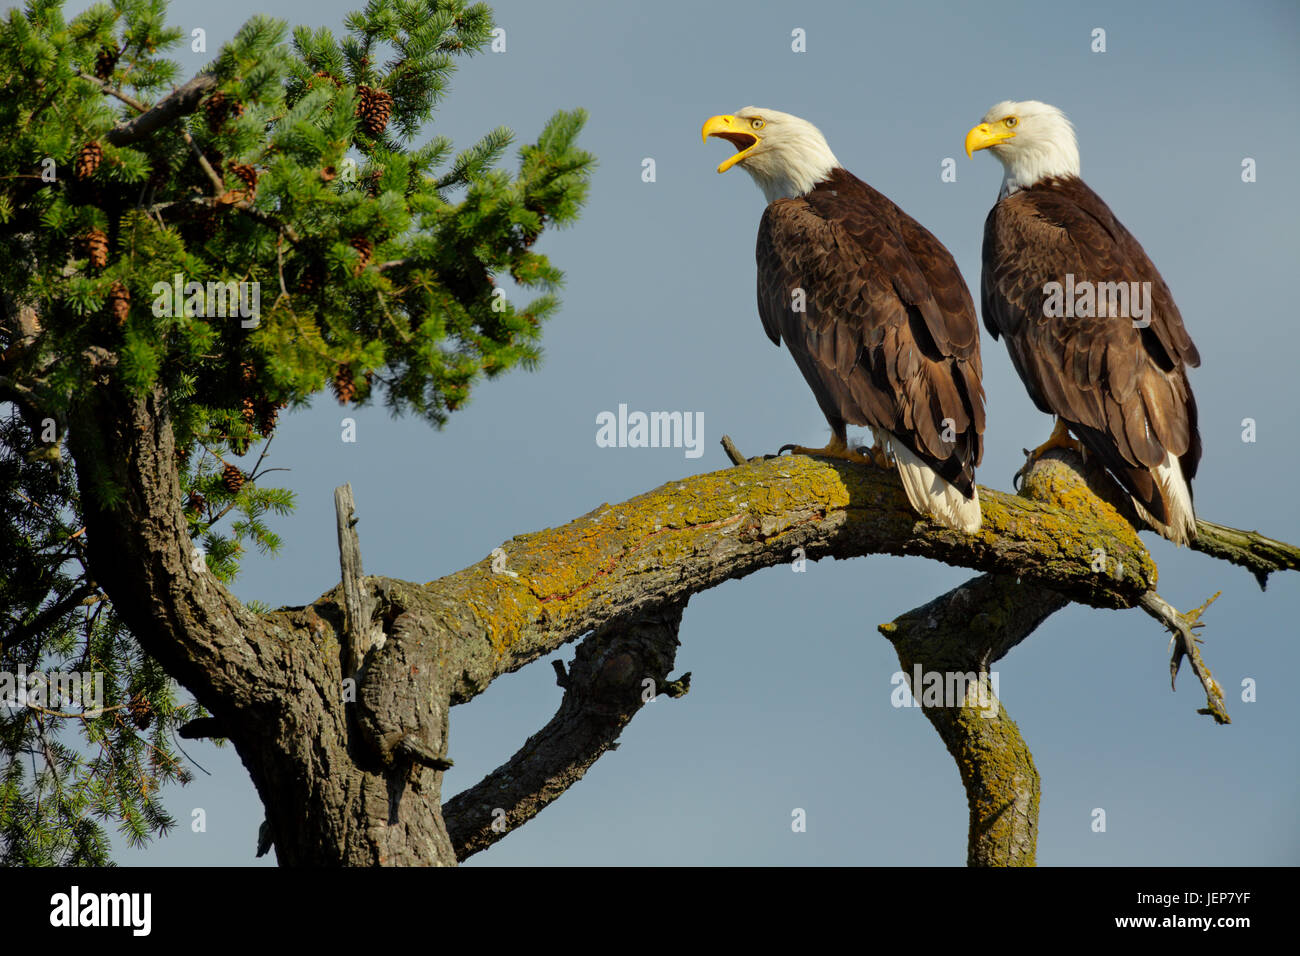 Bald eagle pair perched on branch overlooking Roberts Bay-Sidney, British Columbia, Canada. Stock Photo